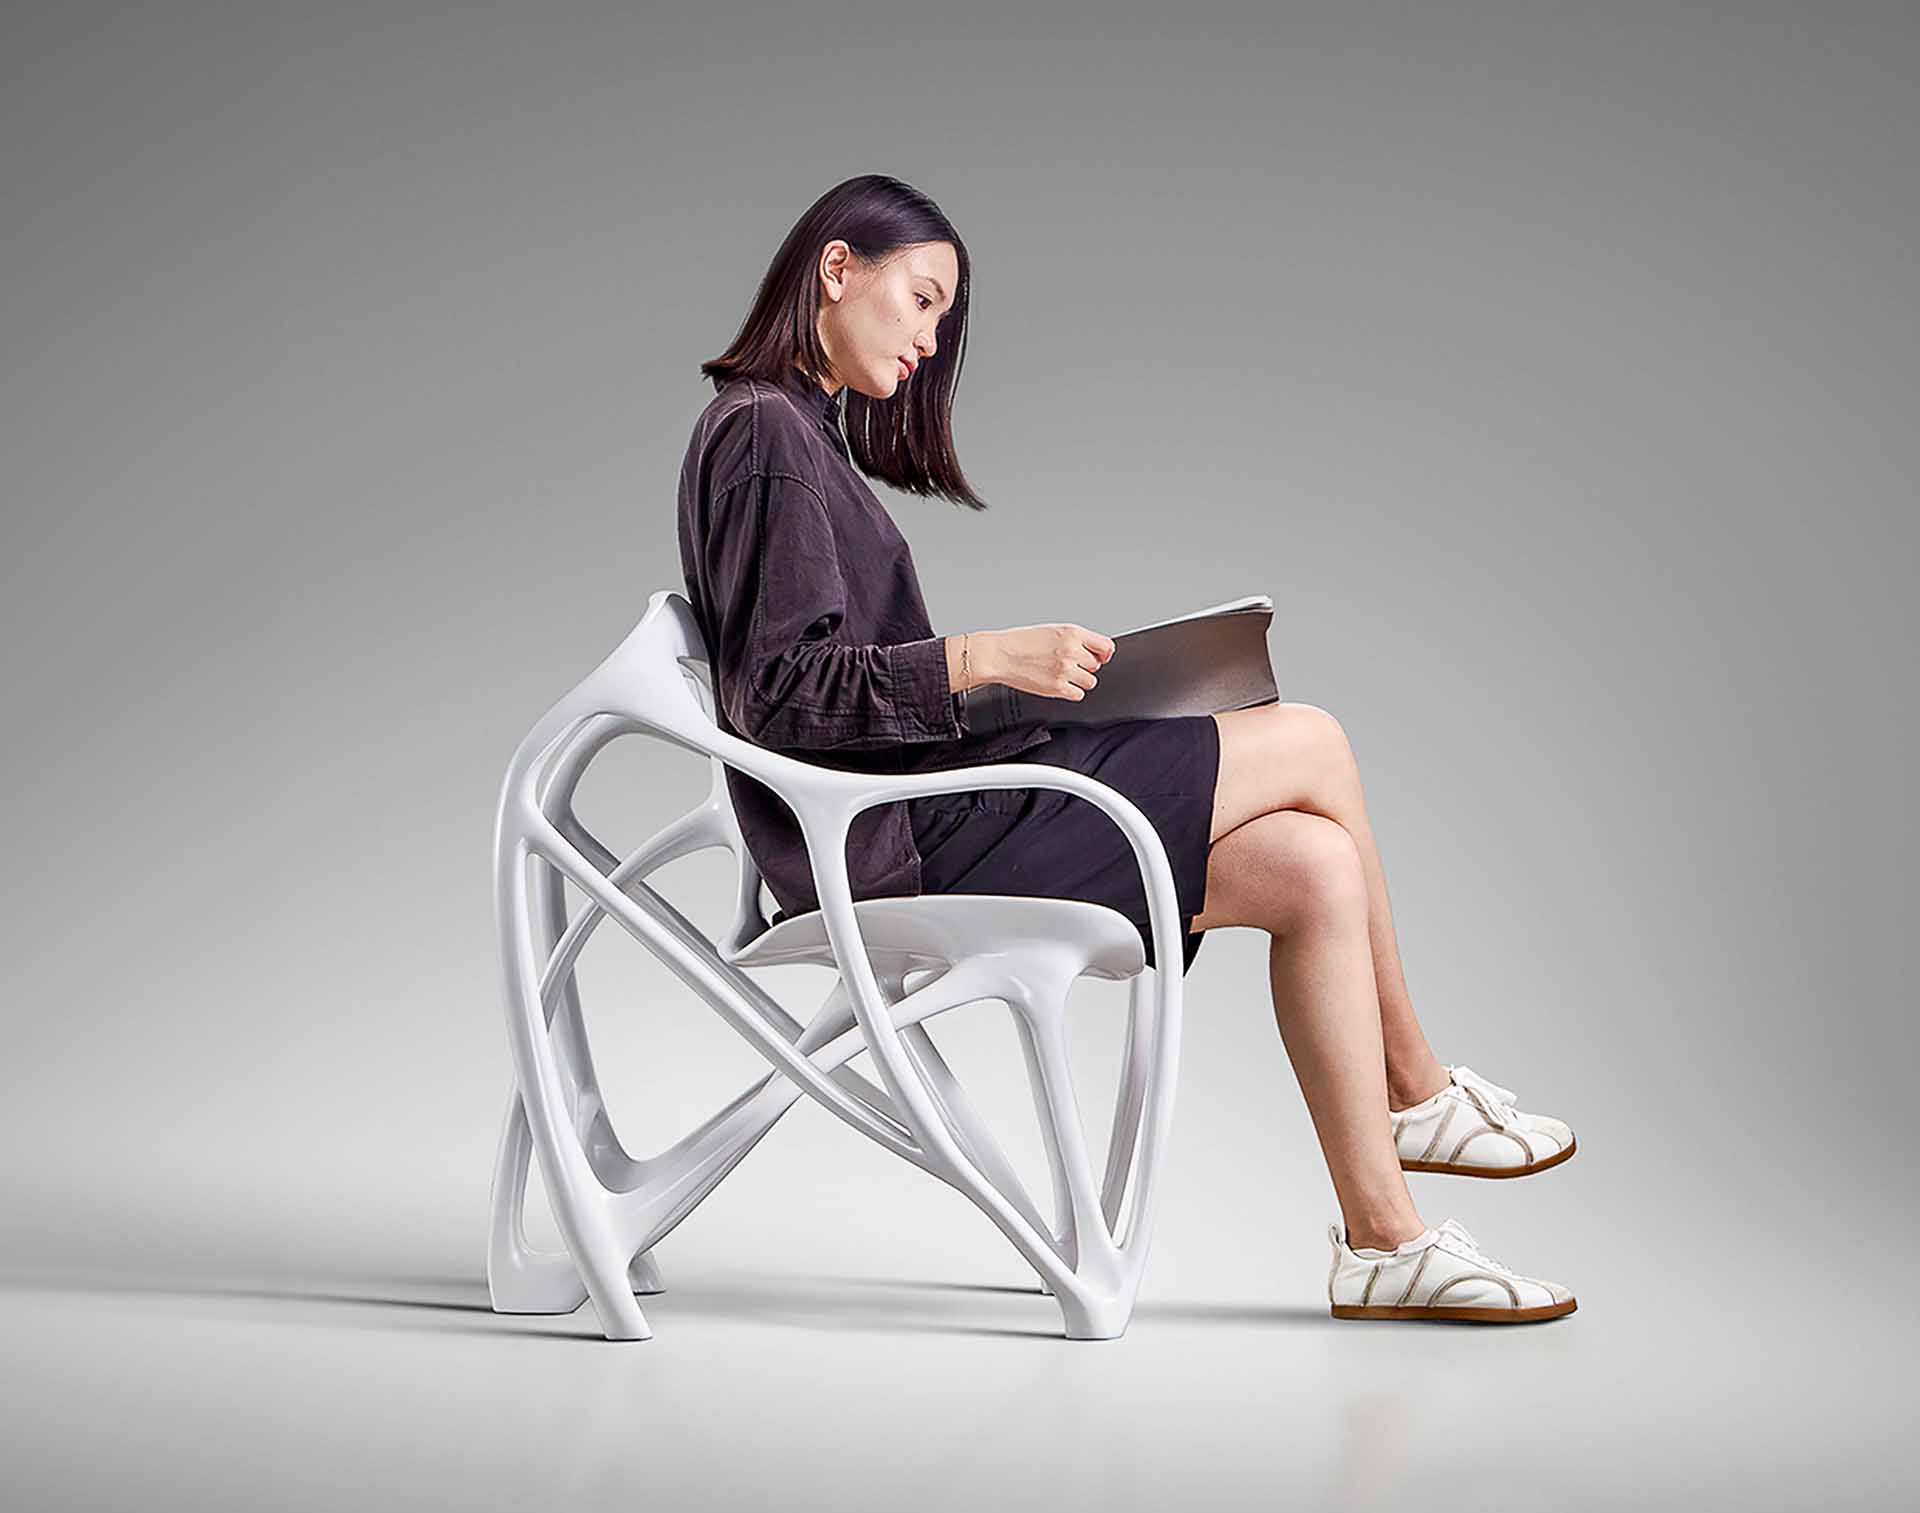 Spidique is a chair manufactured using 3D printing technology.